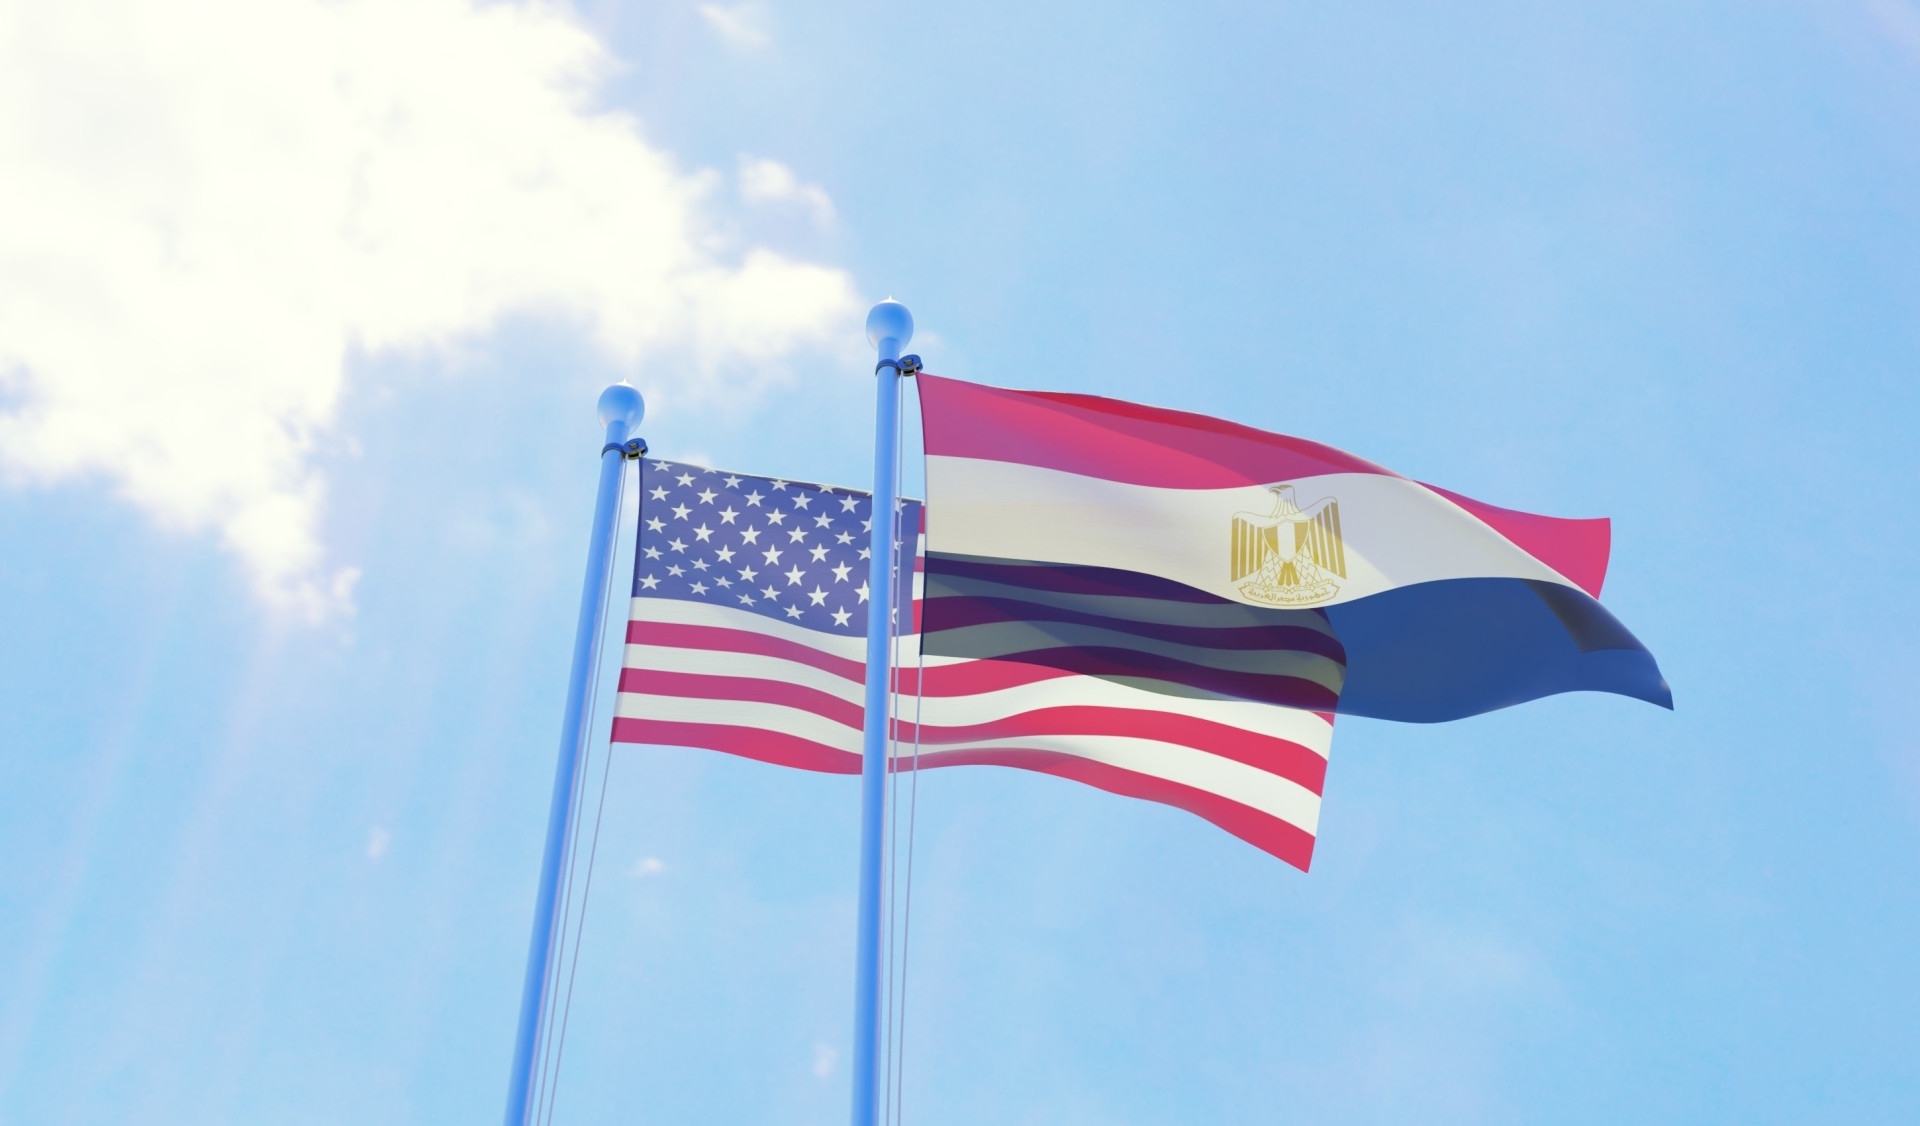 If by culture and tradition, the United States and Egypt seem very different, we find at least one thing in common between both countries: a city called Memphis.<p>You may also like:<a href="https://www.starsinsider.com/n/269804?utm_source=msn.com&utm_medium=display&utm_campaign=referral_description&utm_content=210974v3en-ae"> Surprising foods you thought were vegetarian but really aren't</a></p>